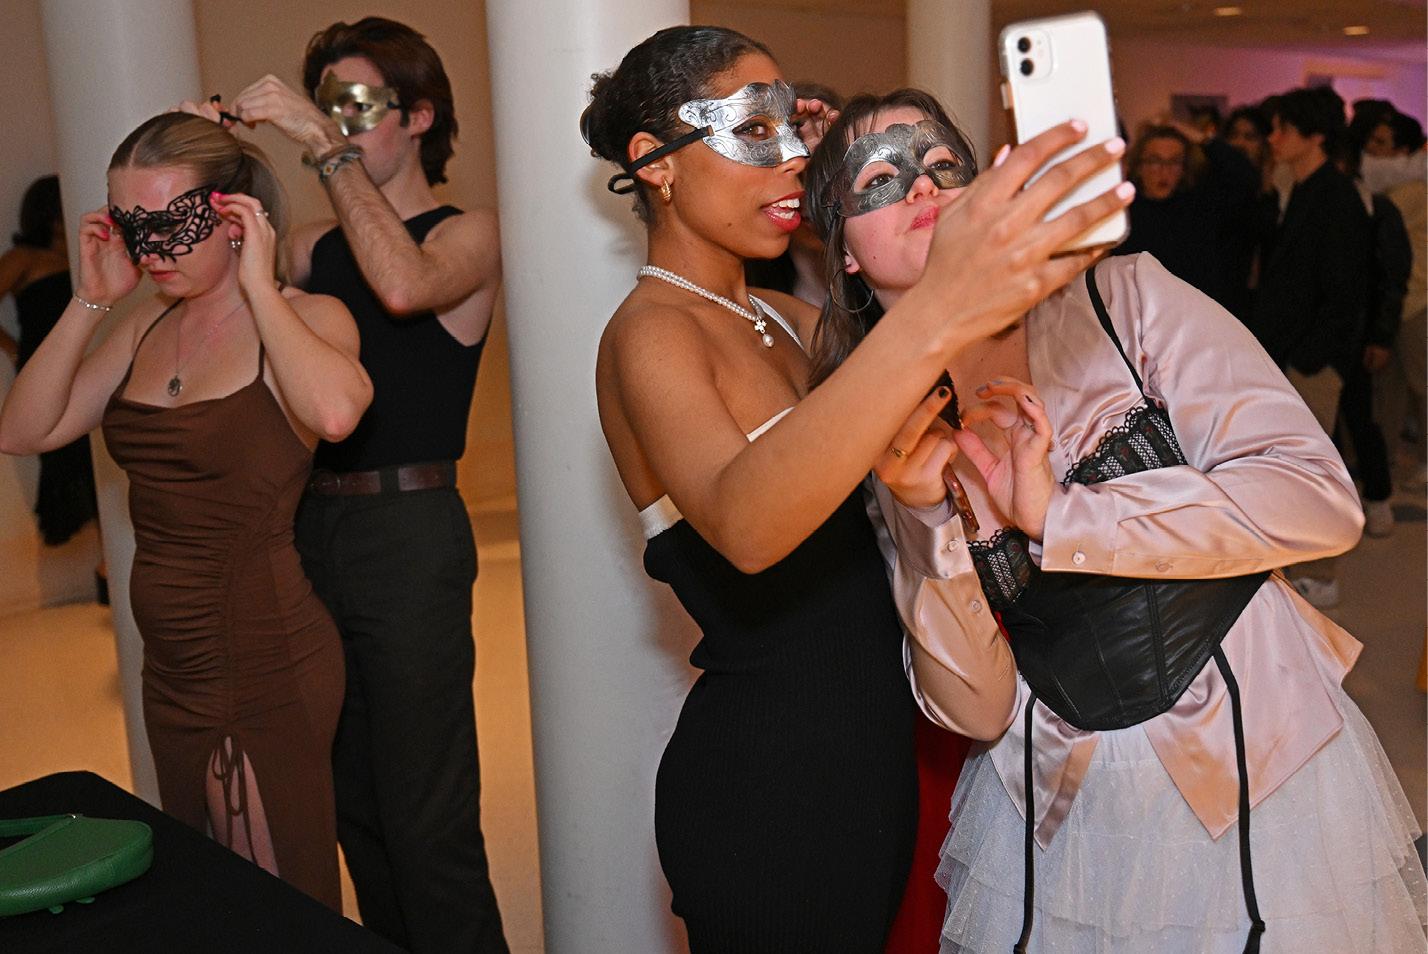 Students take selfies at the winter formal masquerade ball sponsored by the Student Activities Council in the 1962 Room.